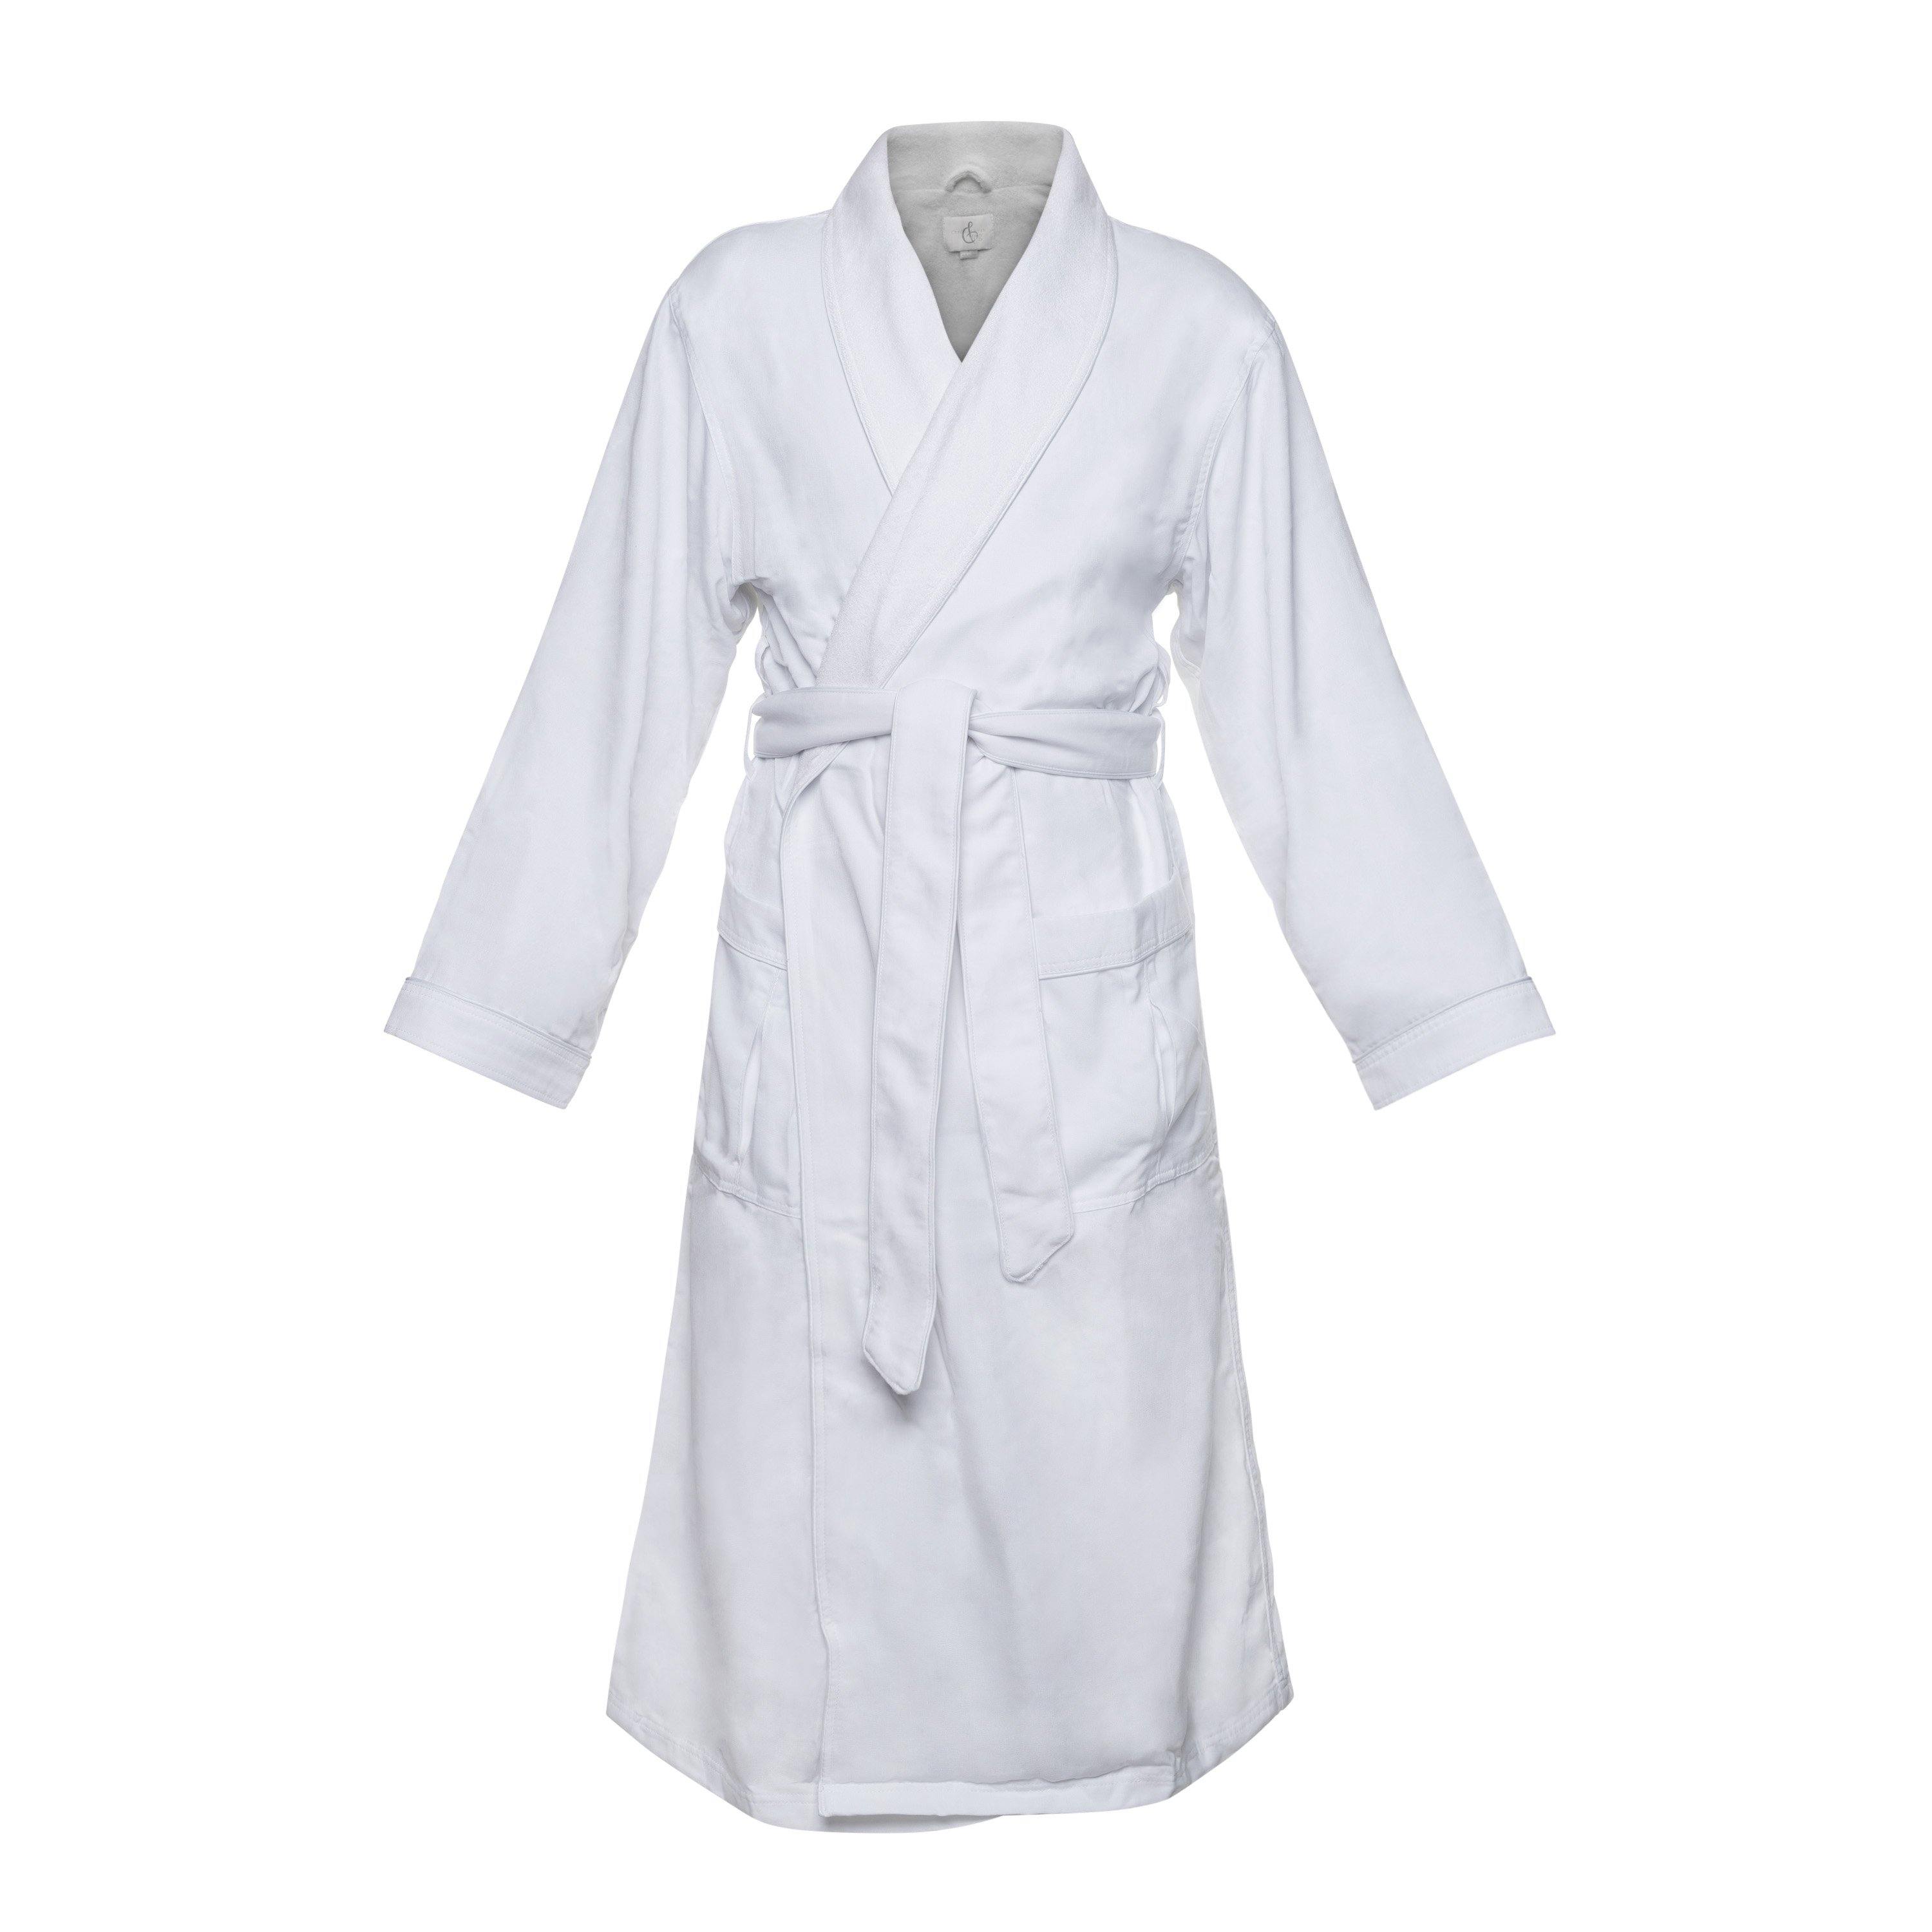 Brushed Microfiber Robe Lined in Terry | Style: DSM4000 – Luxury Hotel ...